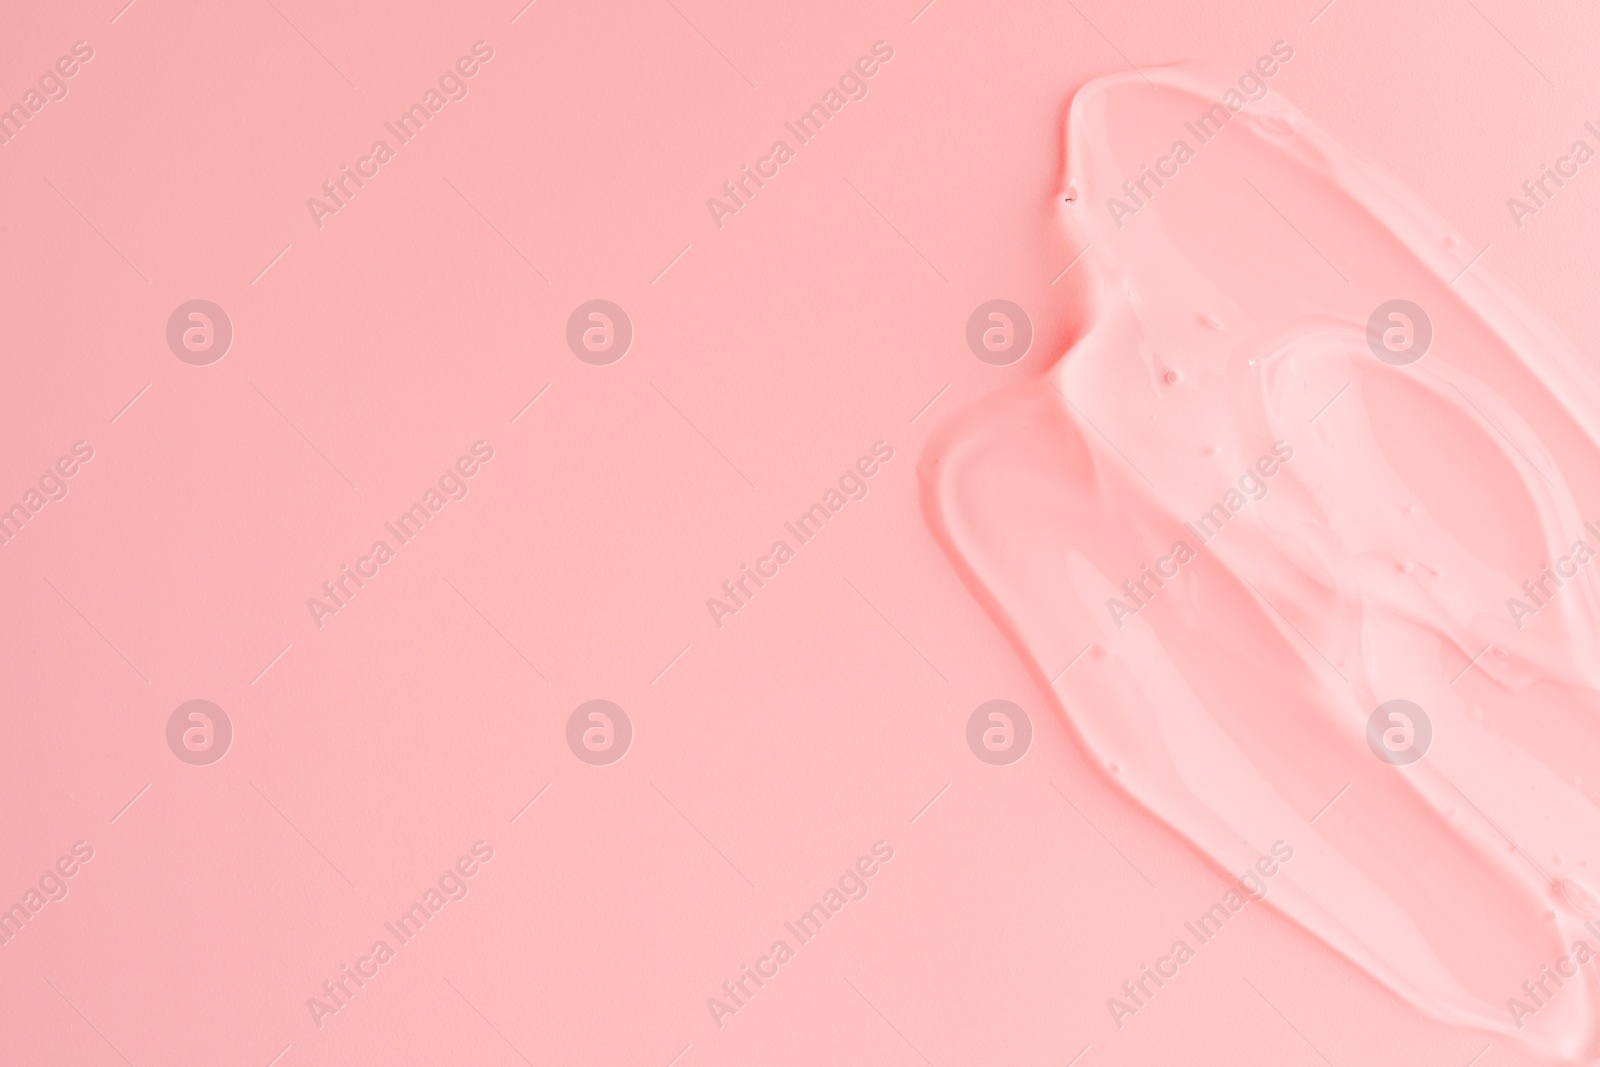 Photo of Sample of transparent gel on pink background, top view. Space for text